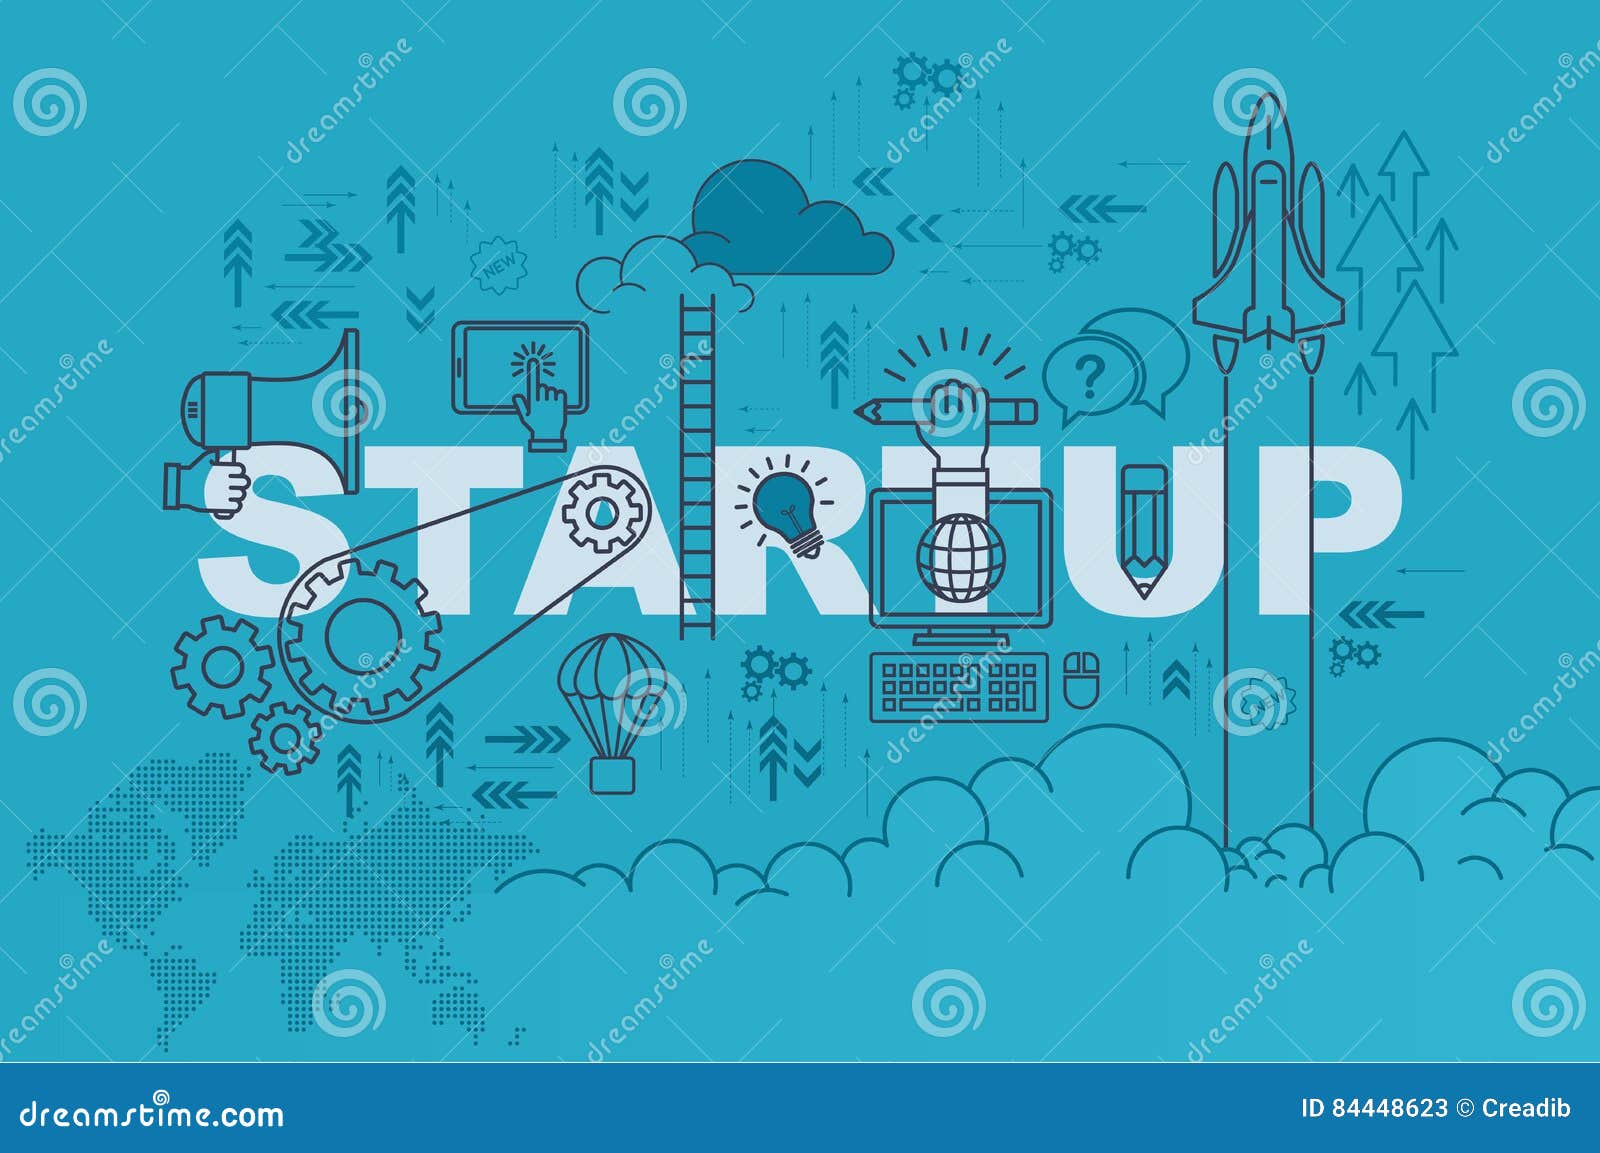 Startup web page banner concept with thin line flat design vector illustration eps-10.